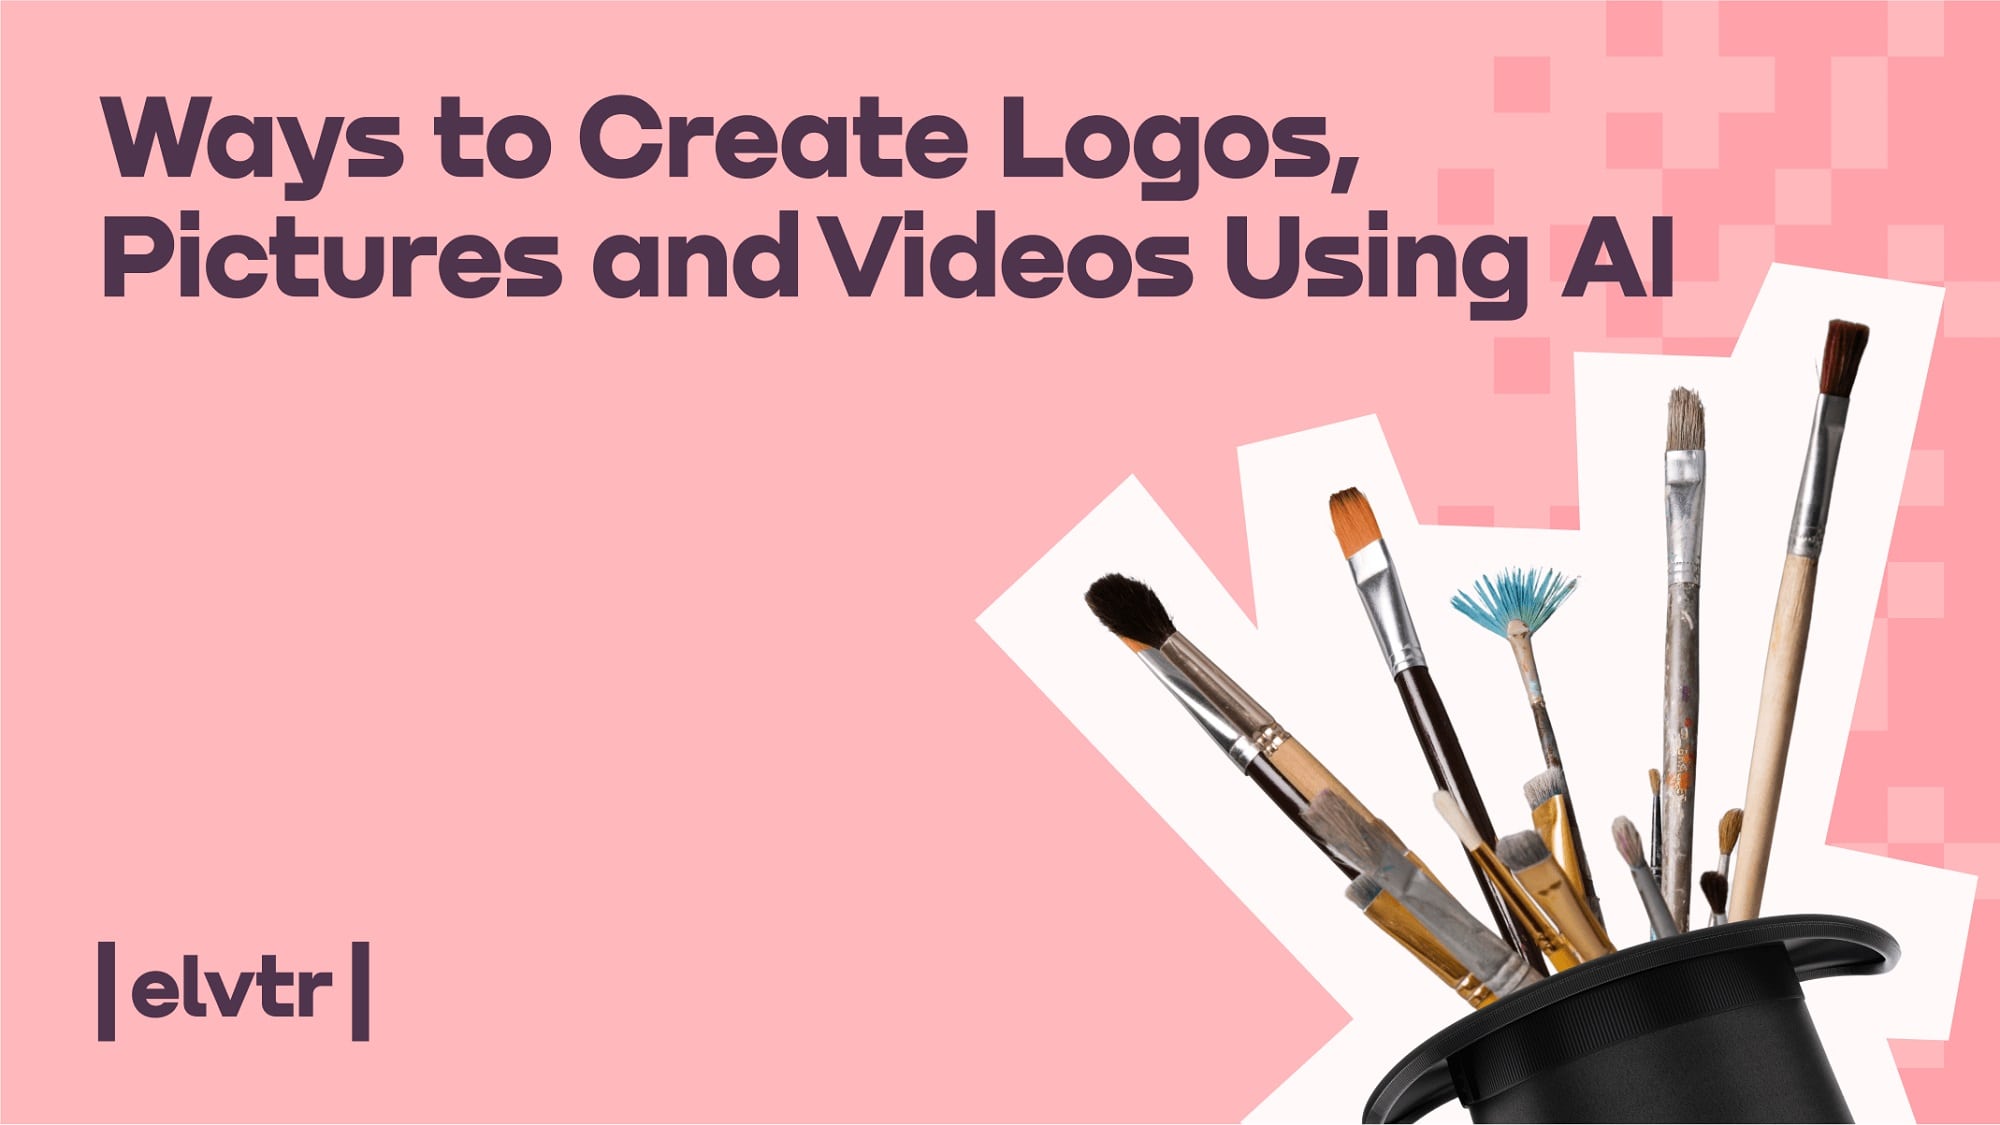 Ways to Create Logos, Pictures and Videos Using AI image